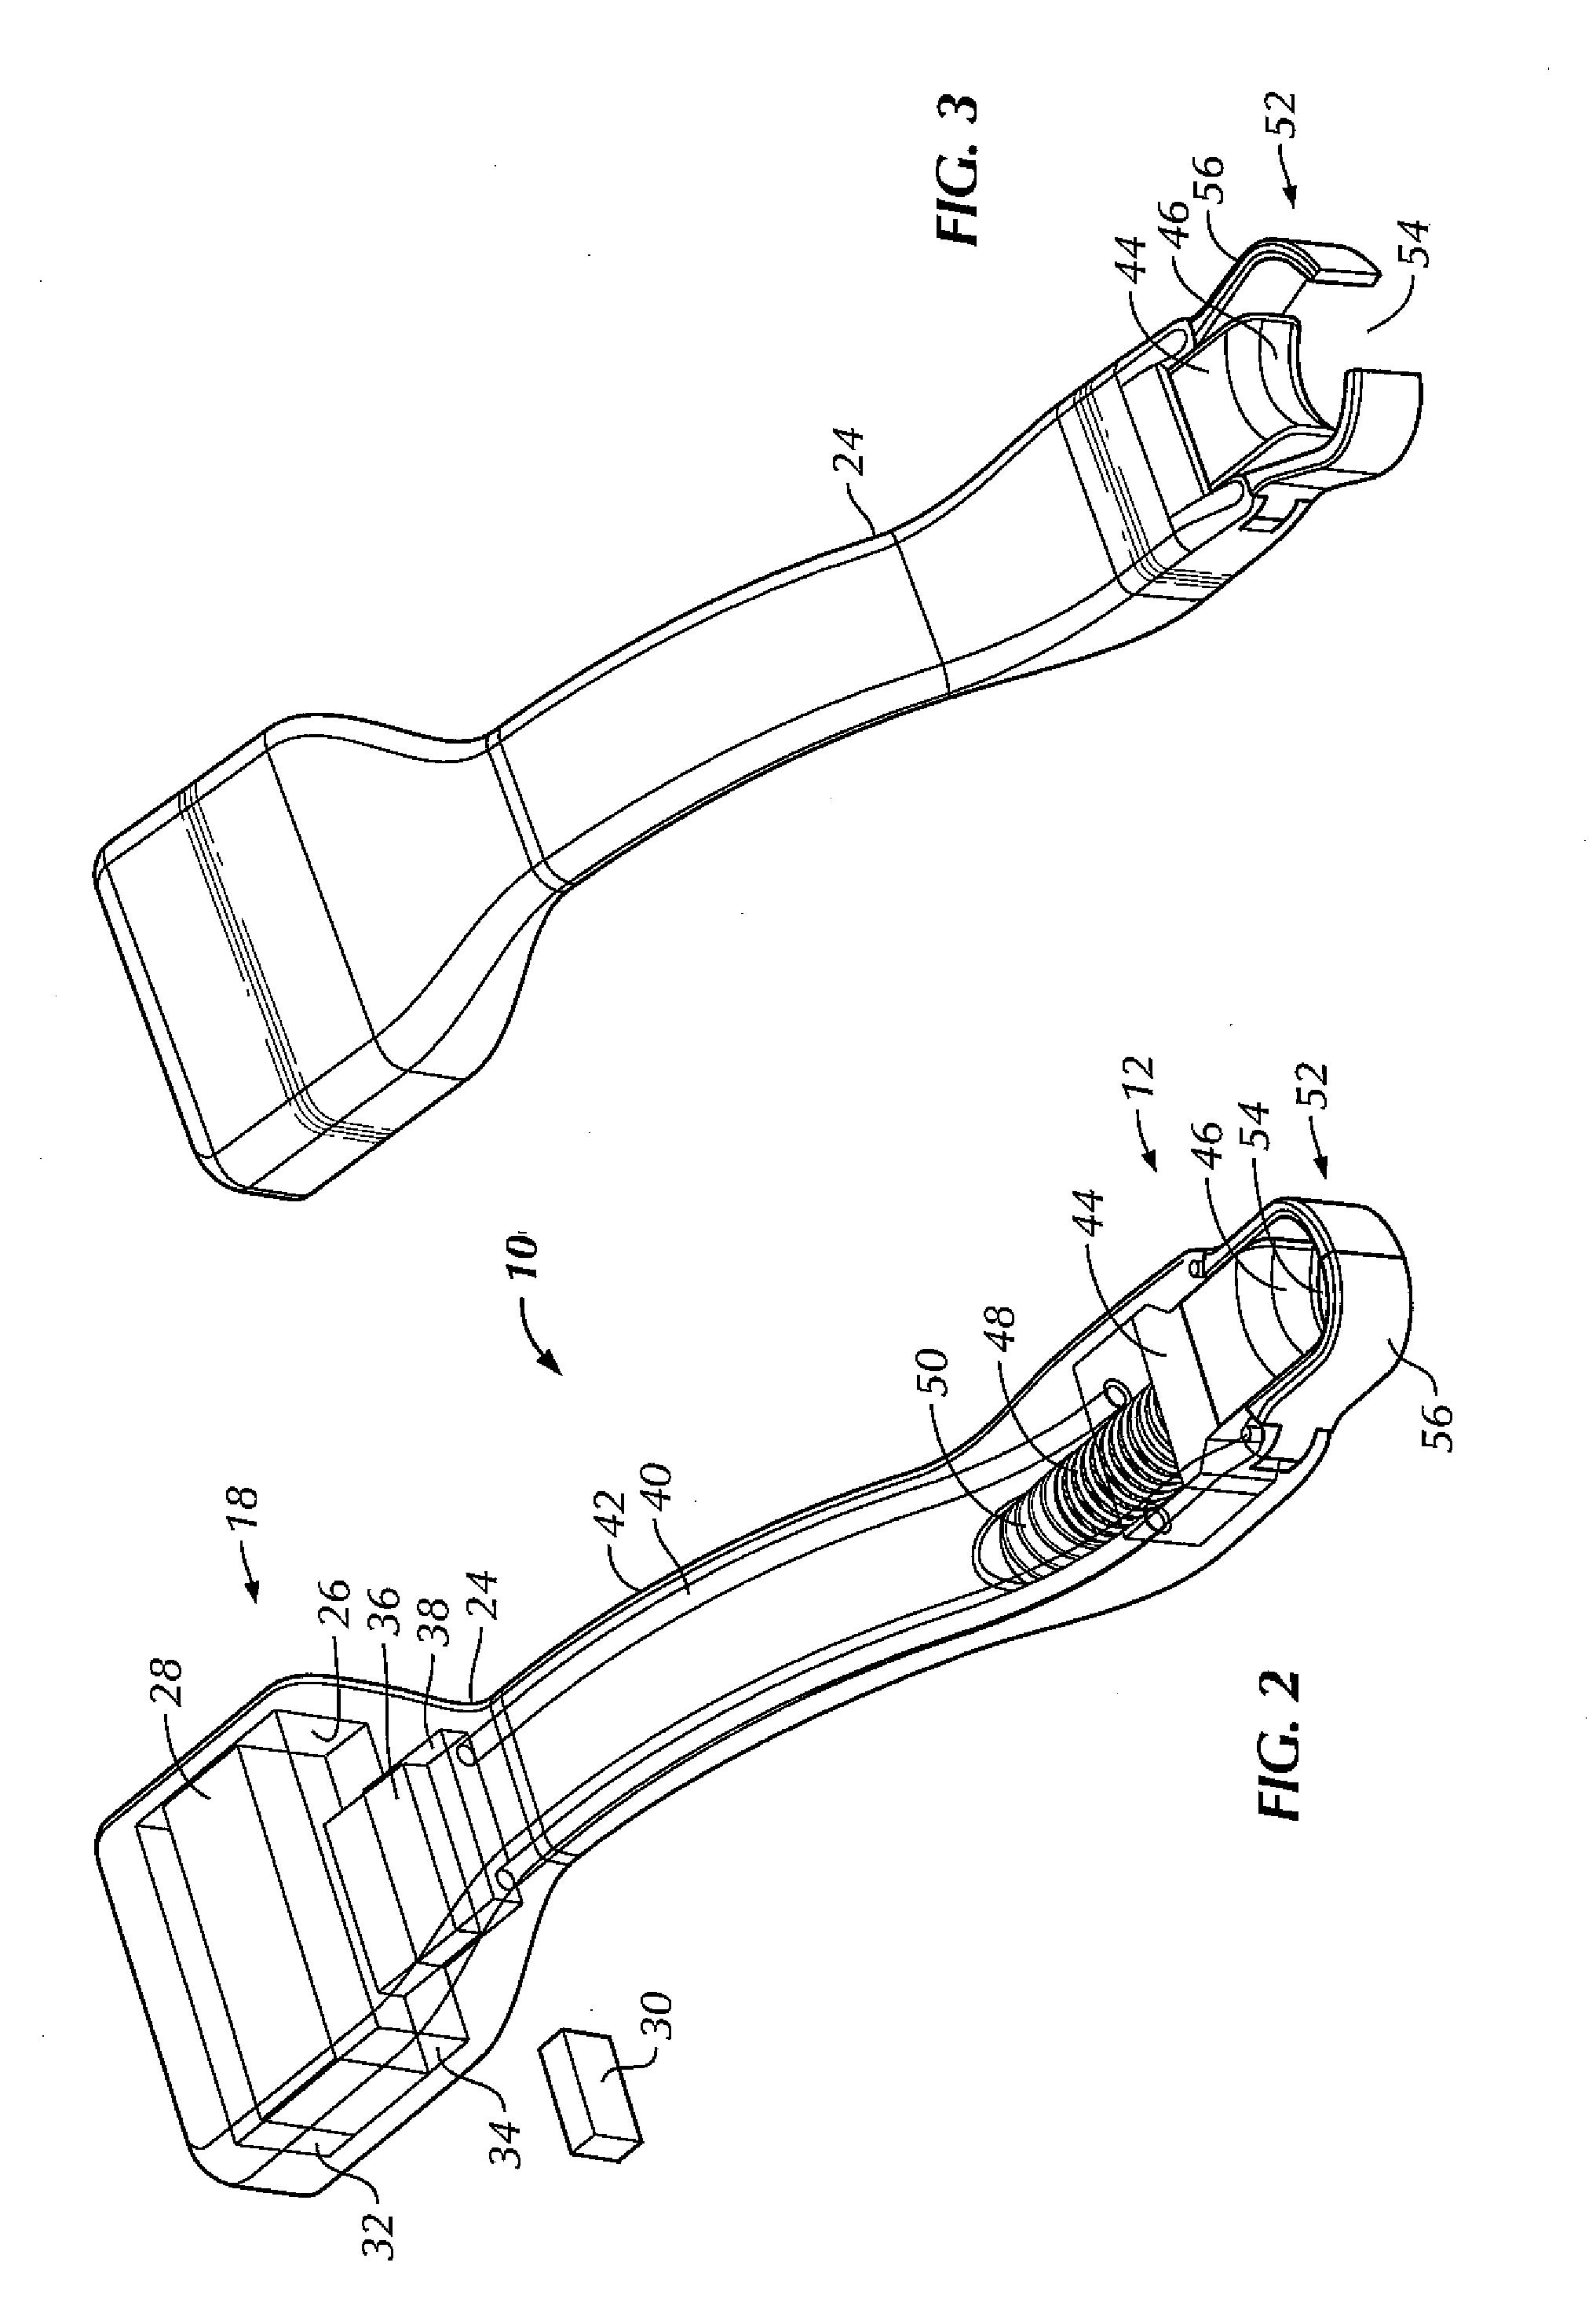 Patient-manipulable device for ameliorating incontinence